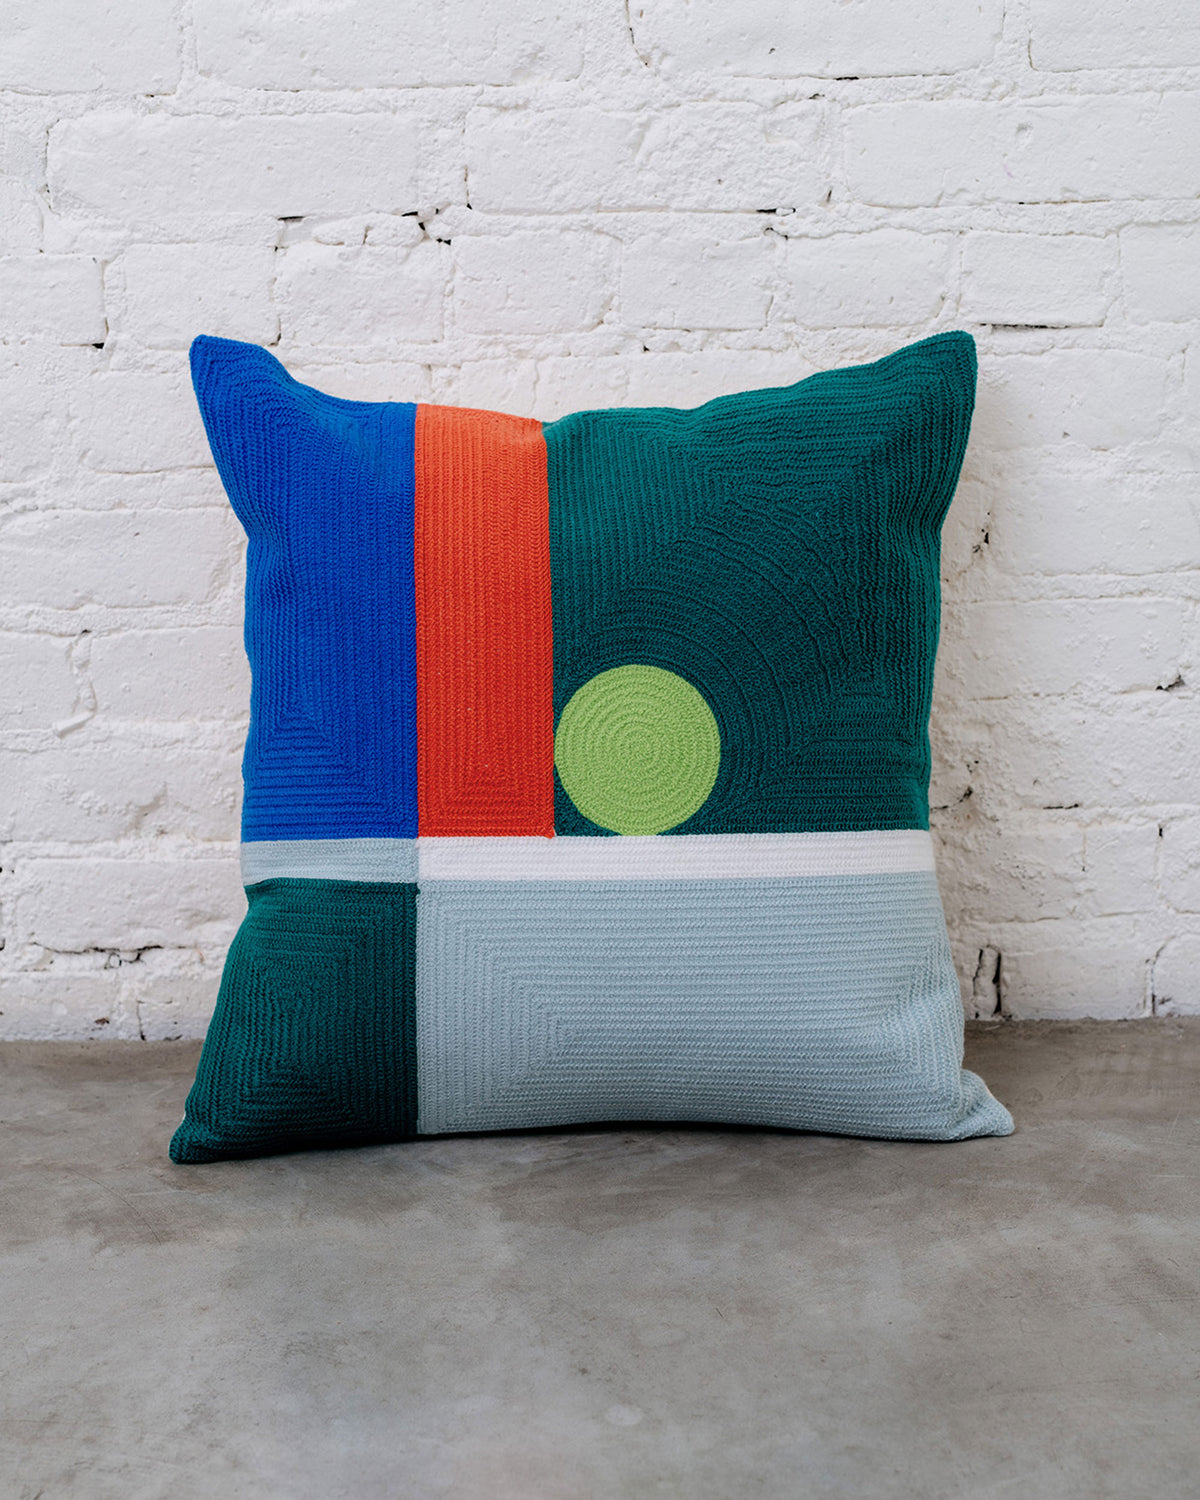 Dusen Dusen Dot Pillow. Embroidered pillow in multi-colored Dot print. 100% cotton, back zip, non-embroidered natural canvas back. Available as 18" x 18". Spot clean only. Made in India.Pillow insert is a polyfill down alternative and mimics the fluffiness of natural down. Insert made in the USA.